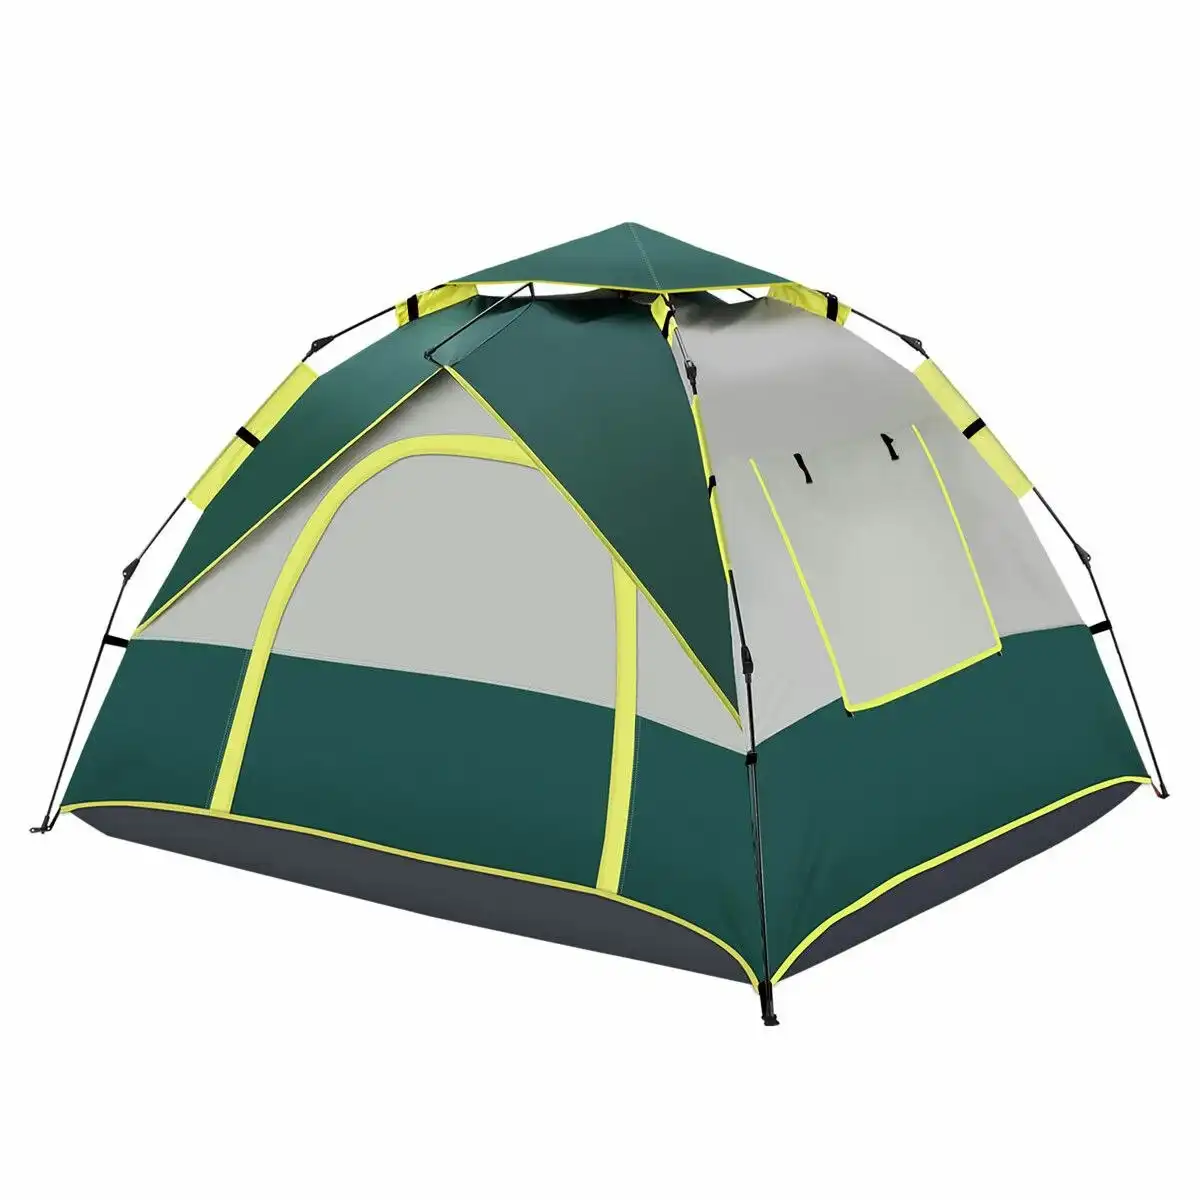 OGL  3 Person Tent Camping Pop Up Instant Beach Sun Shade Shelter Family Waterproof 215x200x141cm Green White